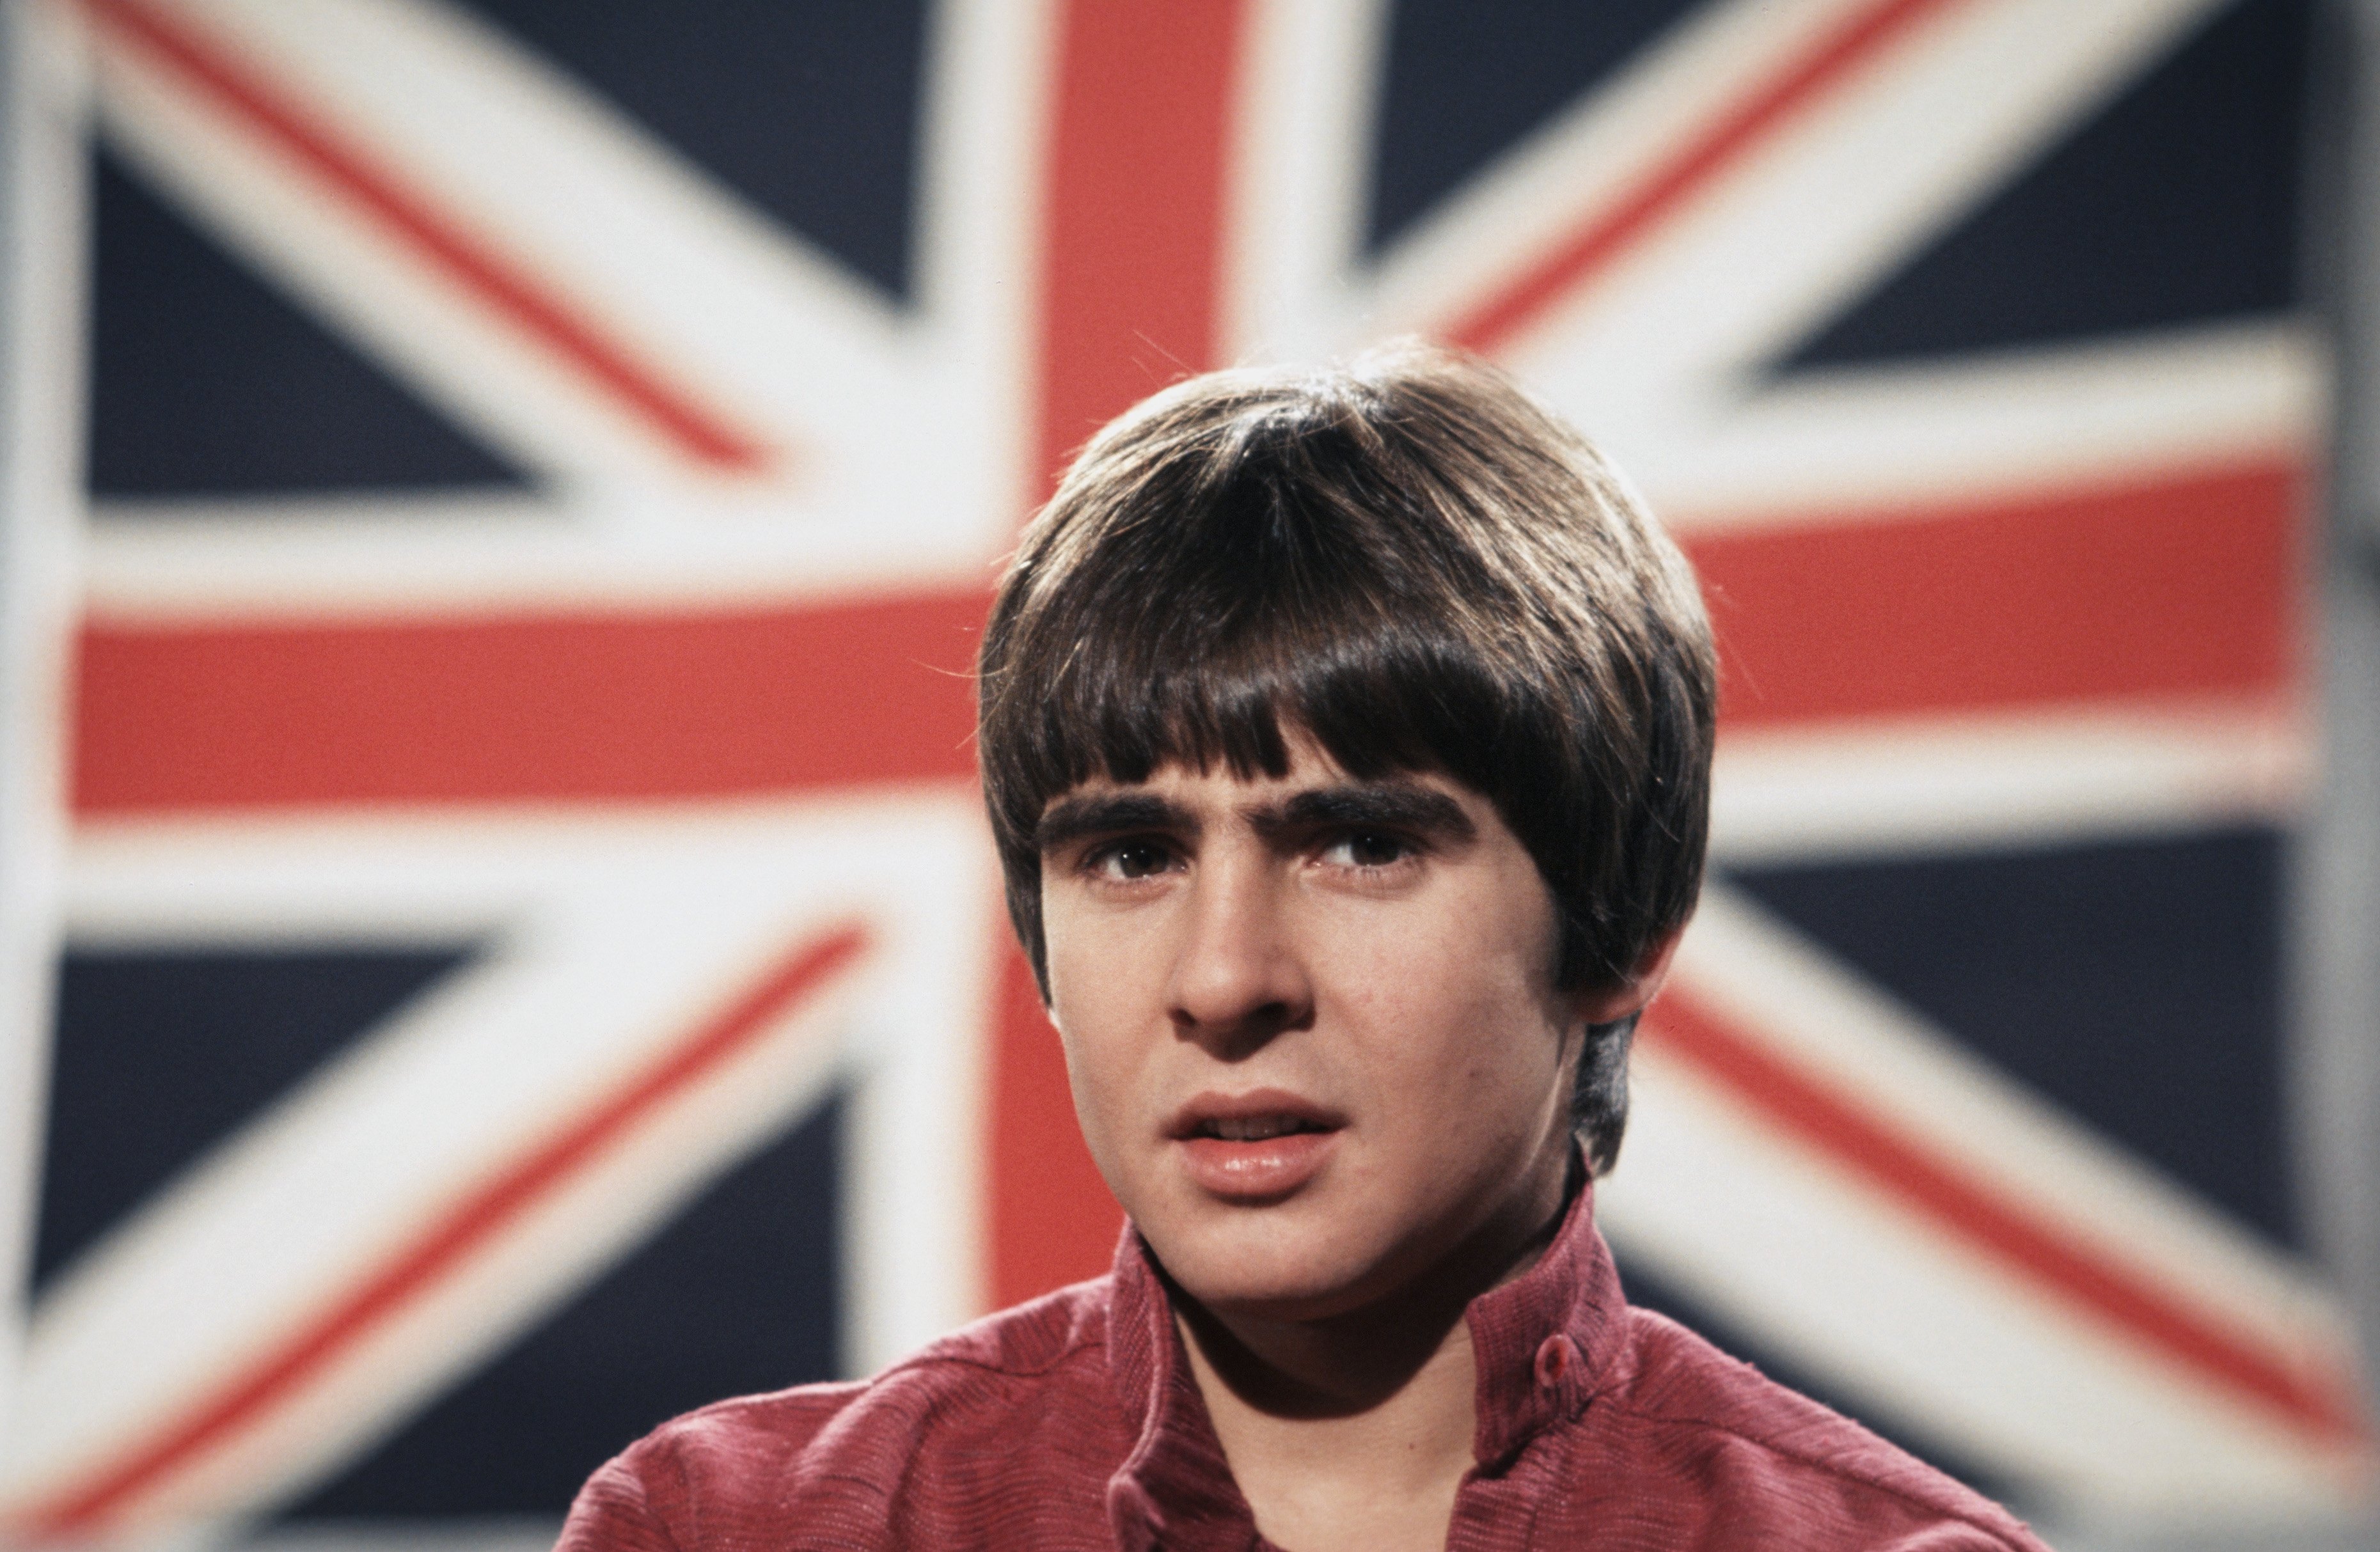 Davy Jones of the Monkees by a Union Jakc/British flag